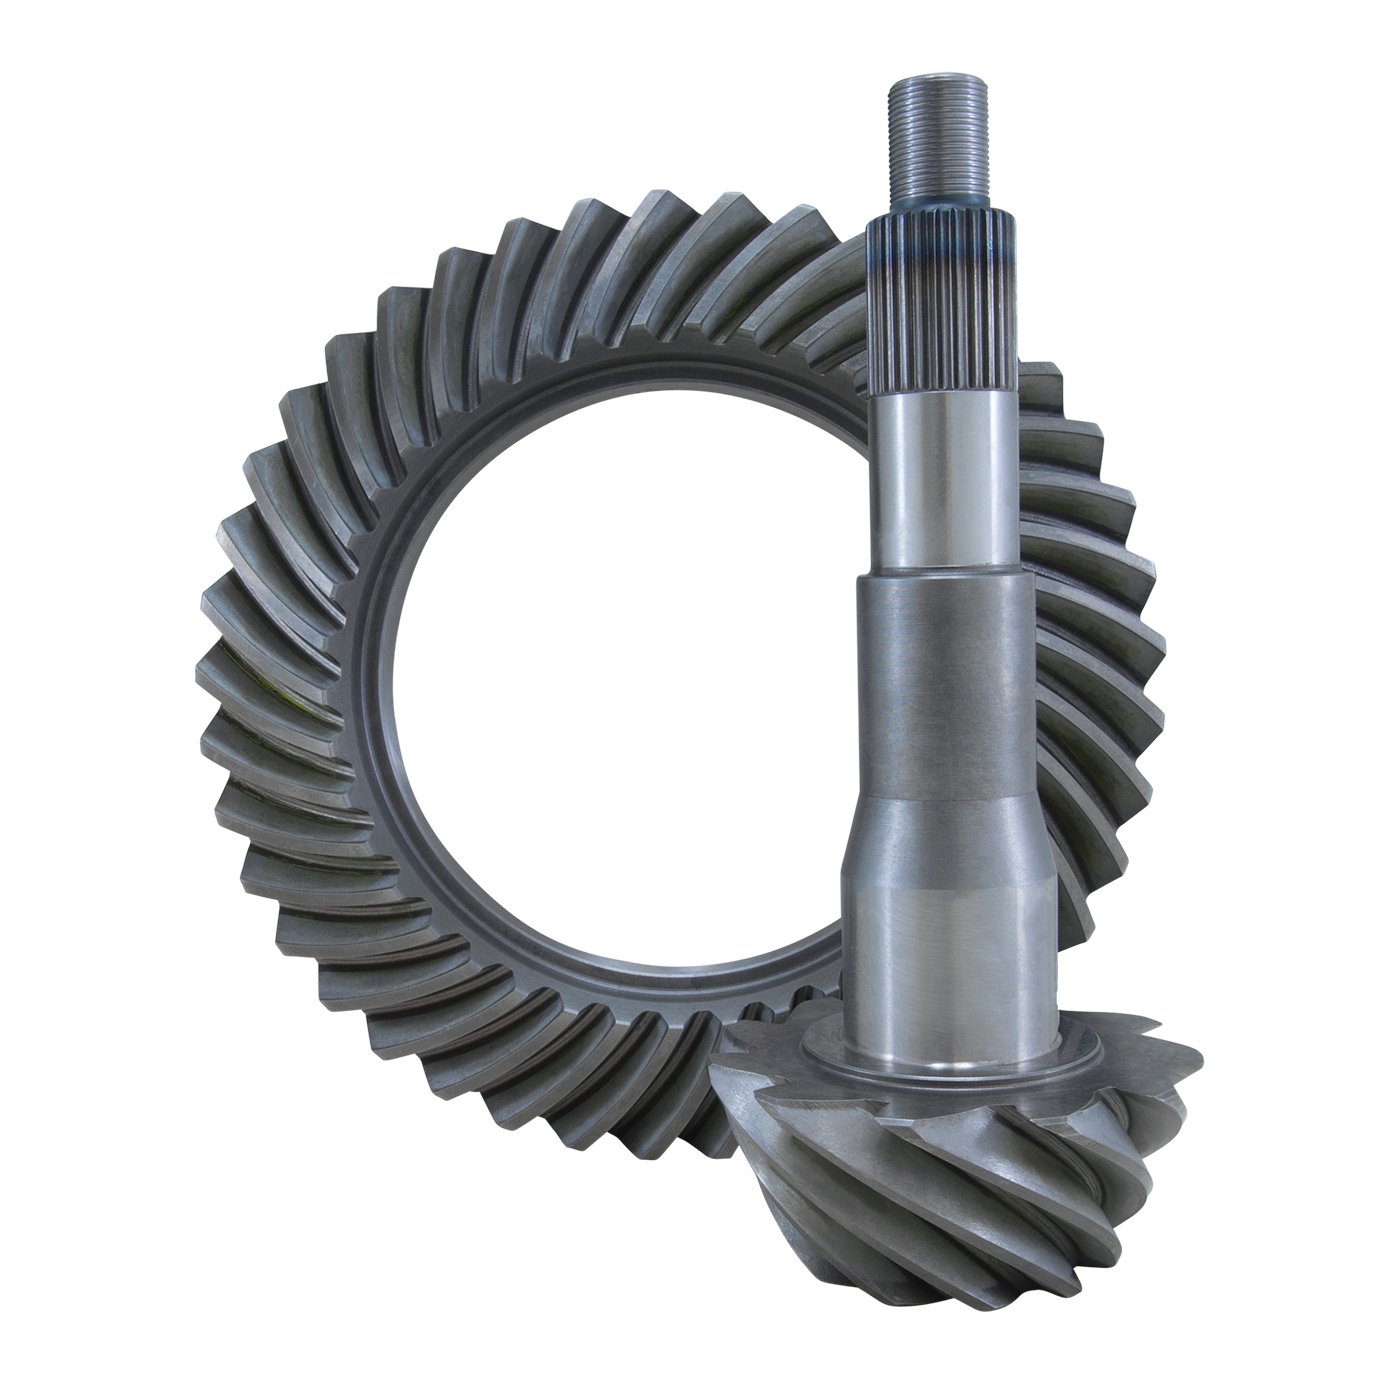 USA Standard 36105 Ring & Pinion Gear Set, For Ford 10.25 in., 4.11 Ratio